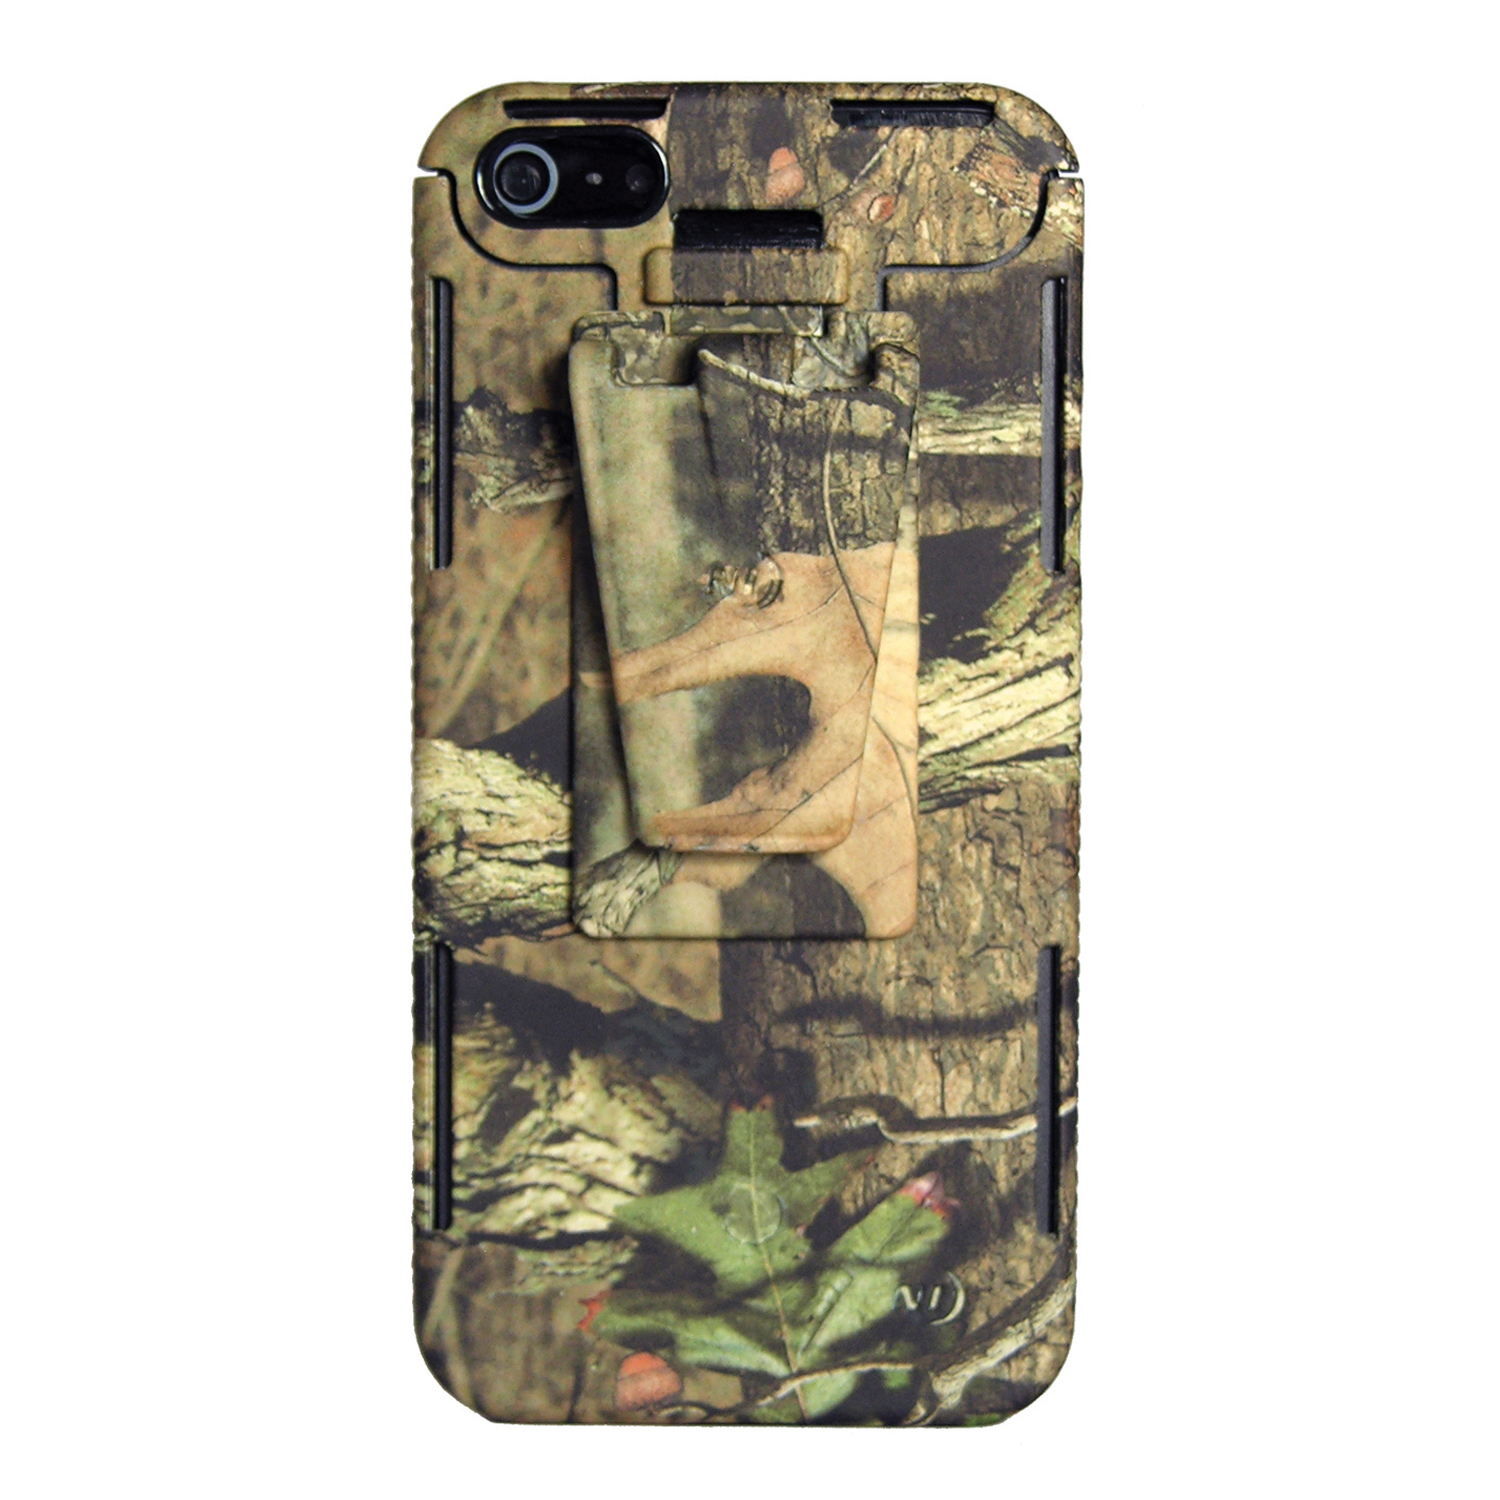 UPC 094664026483 product image for Nite Ize iPhone 5 Connect Case - Solid Mossy Oak Break-Up Infinity | upcitemdb.com